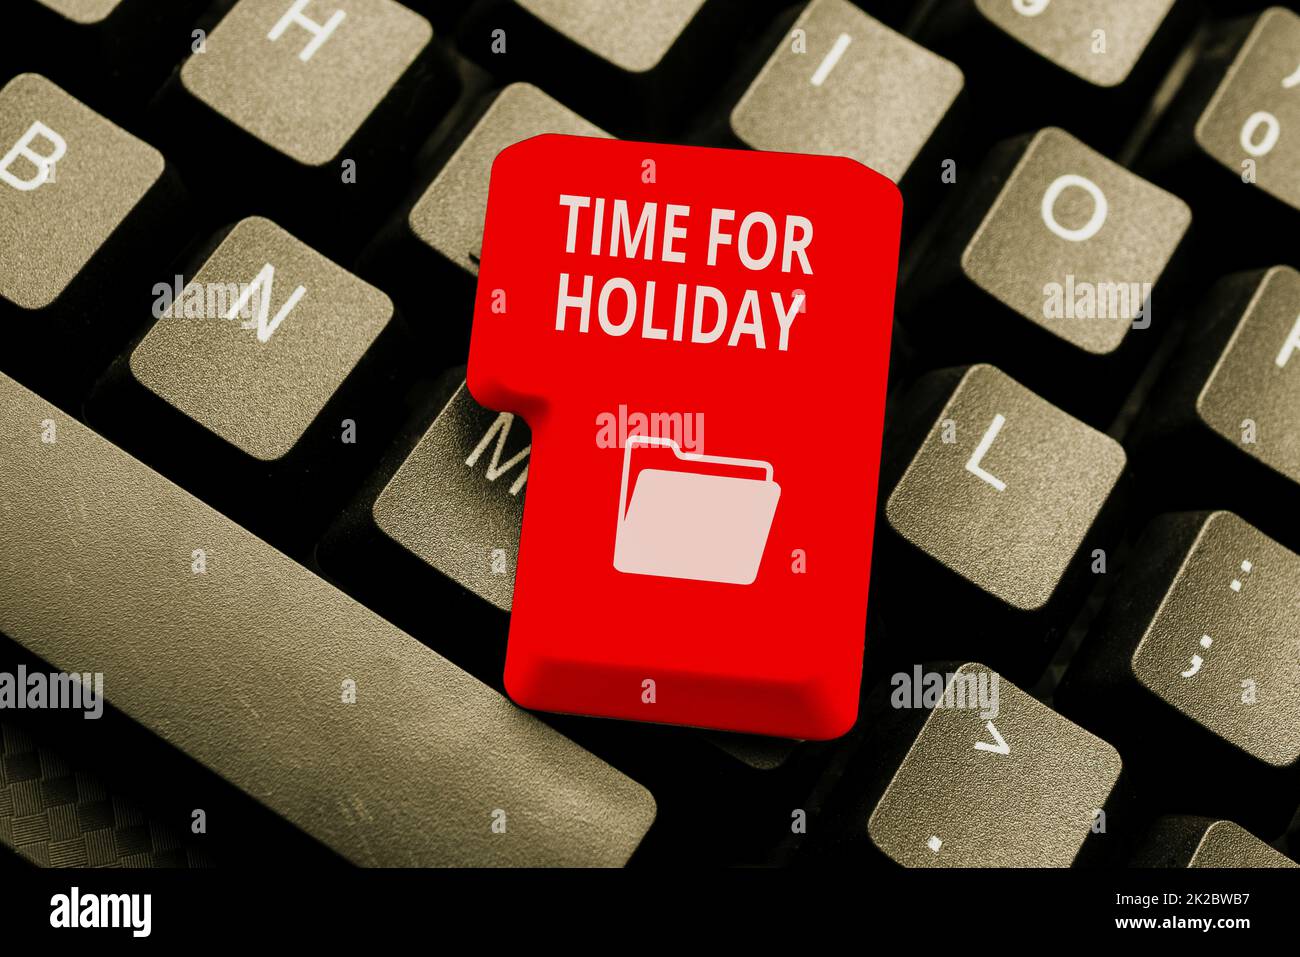 Writing displaying text Time For Holiday. Internet Concept telling someone that this moment for resting Summer Beach Typing Image Descriptions And Keywords, Entering New Internet Website Stock Photo